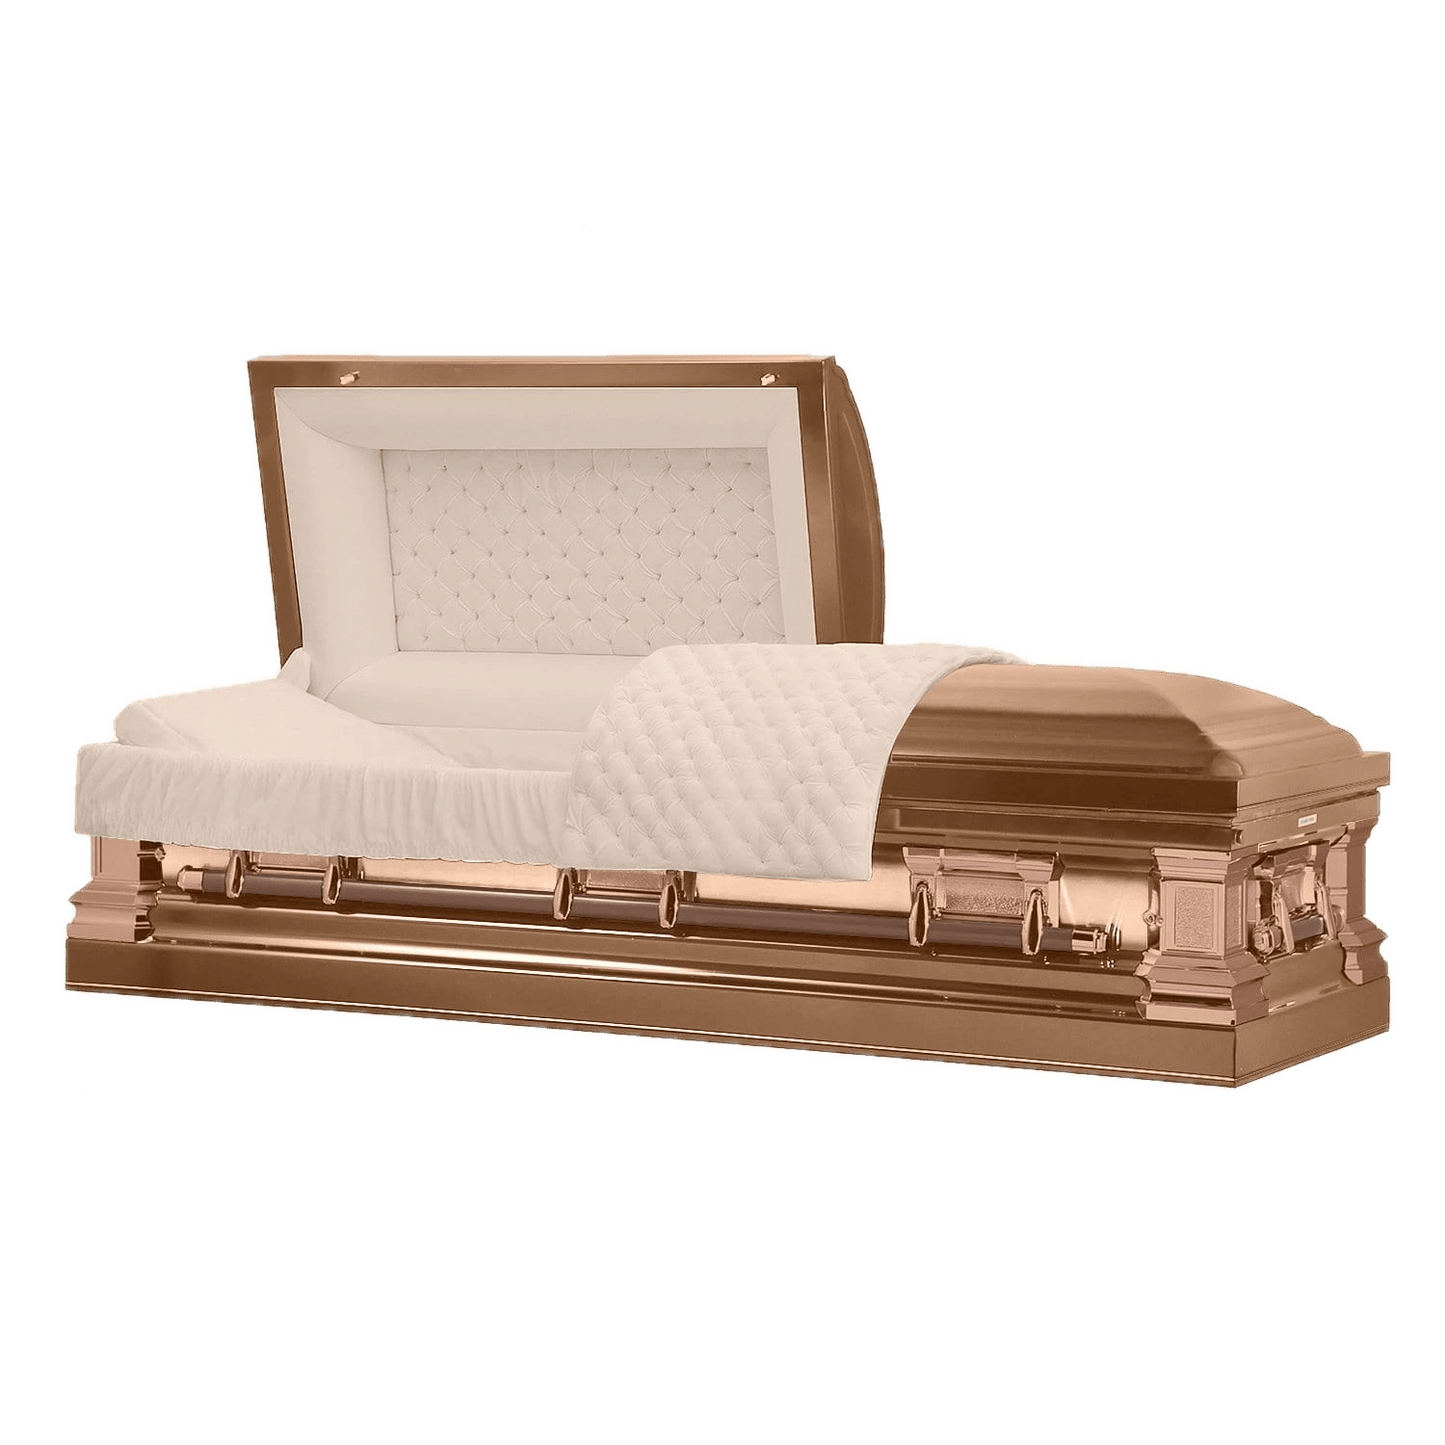 Era Stainless Series | Copper Stainless Steel Casket with Rosetan Interior